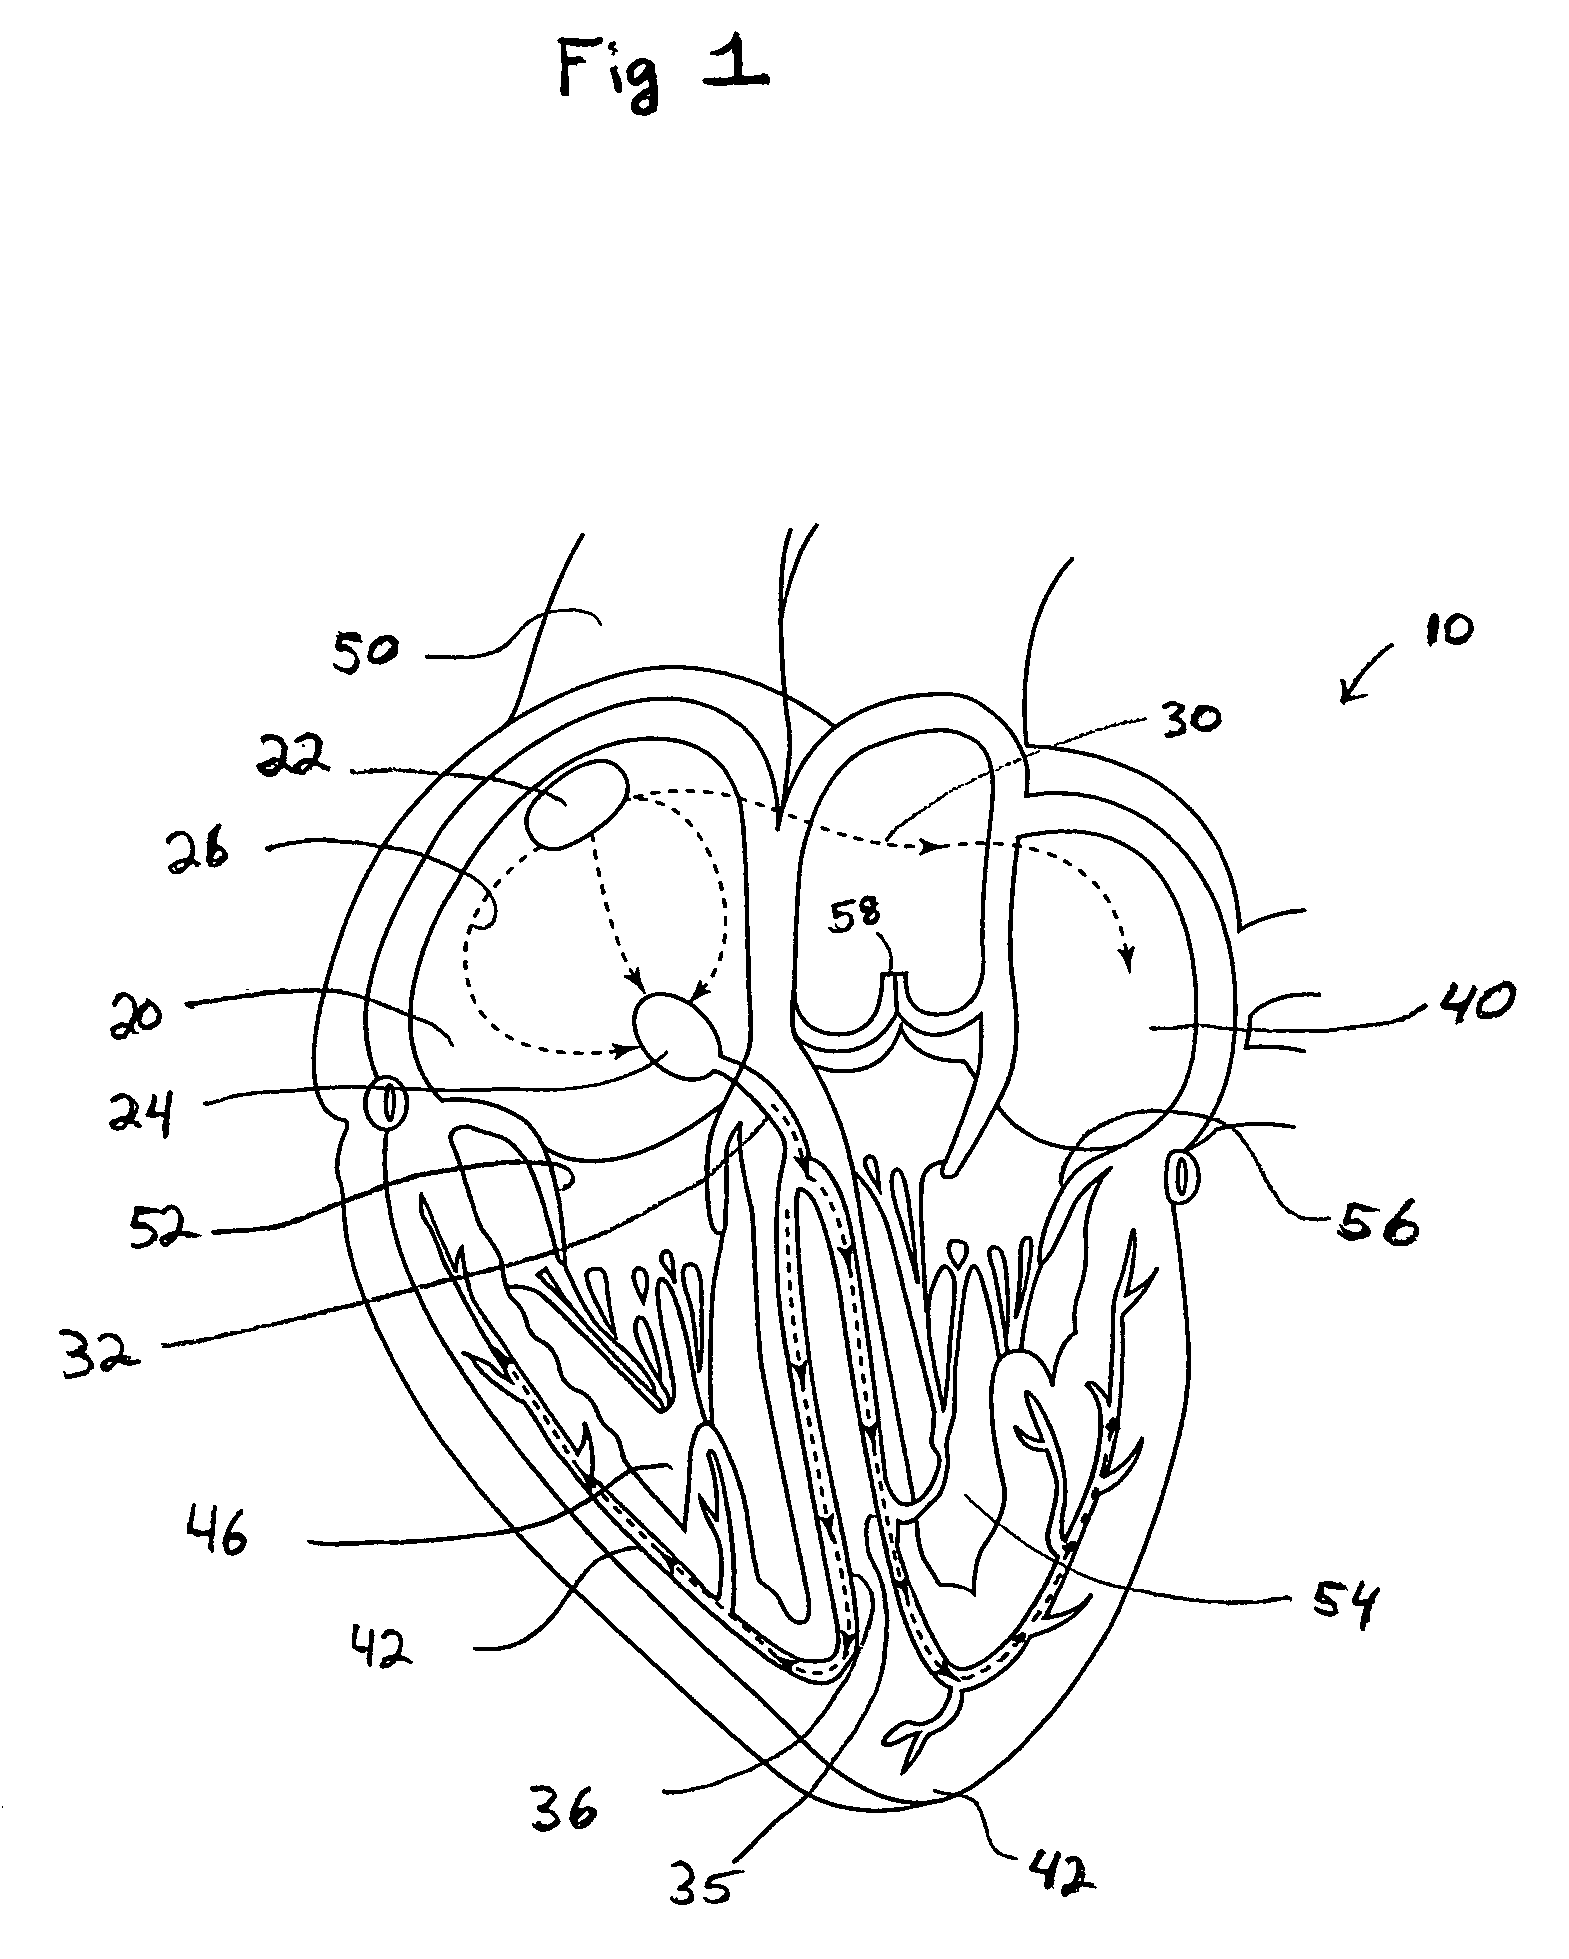 System and method of AV interval selection in an implantable medical device